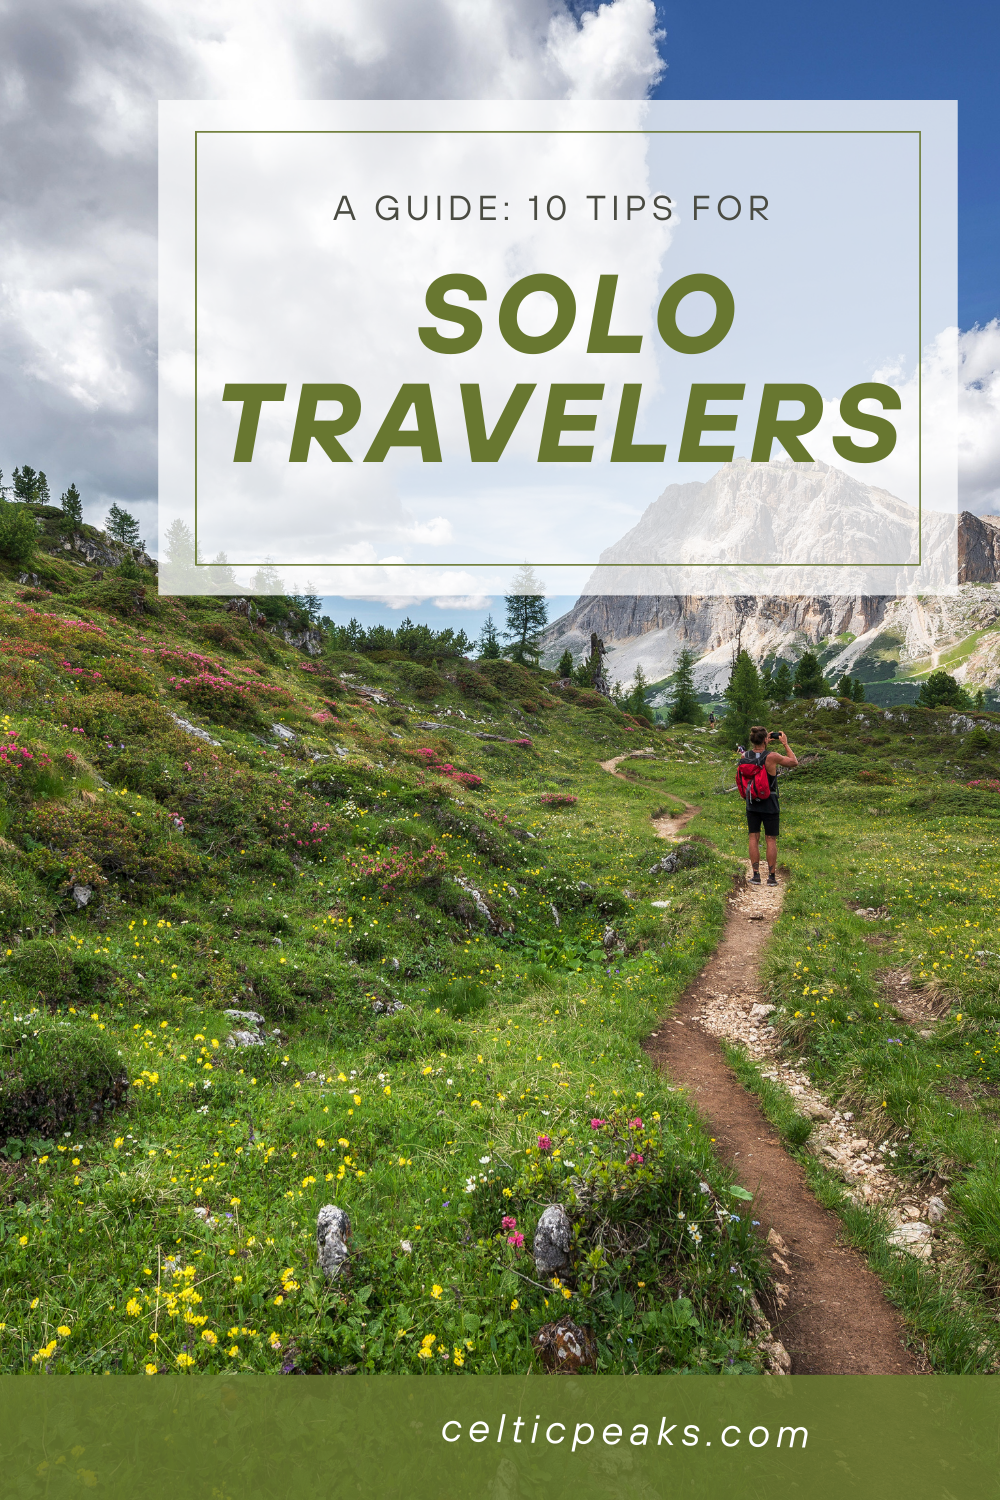 A Guide: 10 Tips for Solo Travelers